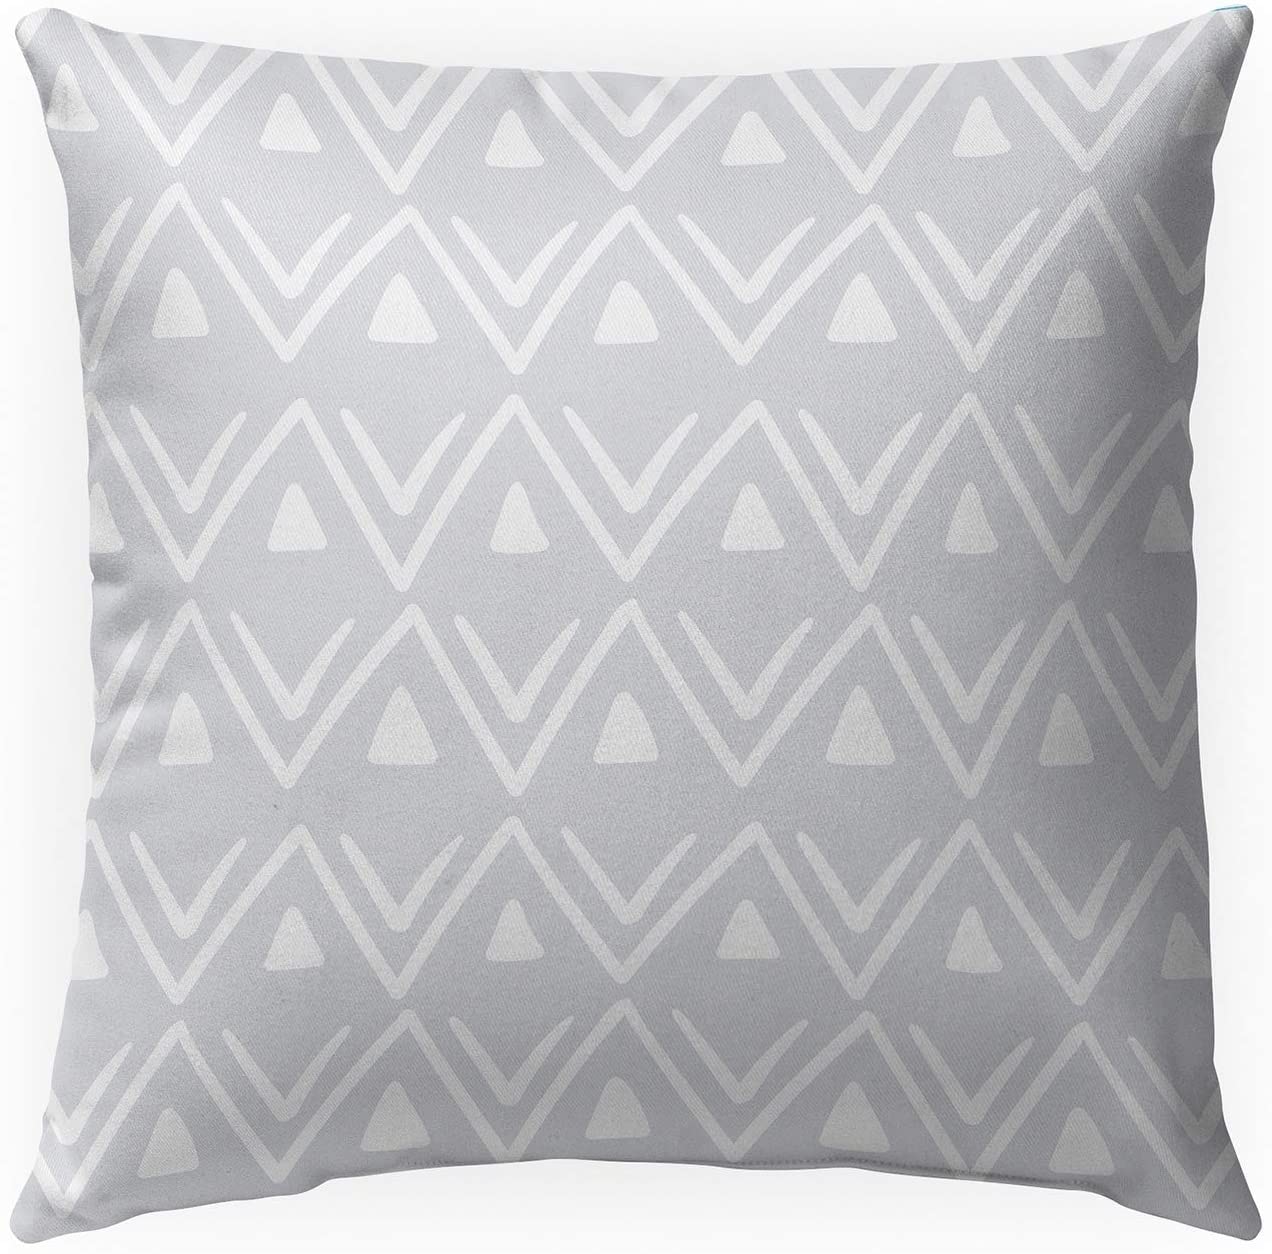 MISC Etched Zig Zag Grey Indoor|Outdoor Pillow by 18x18 Grey Geometric Southwestern Polyester Removable Cover